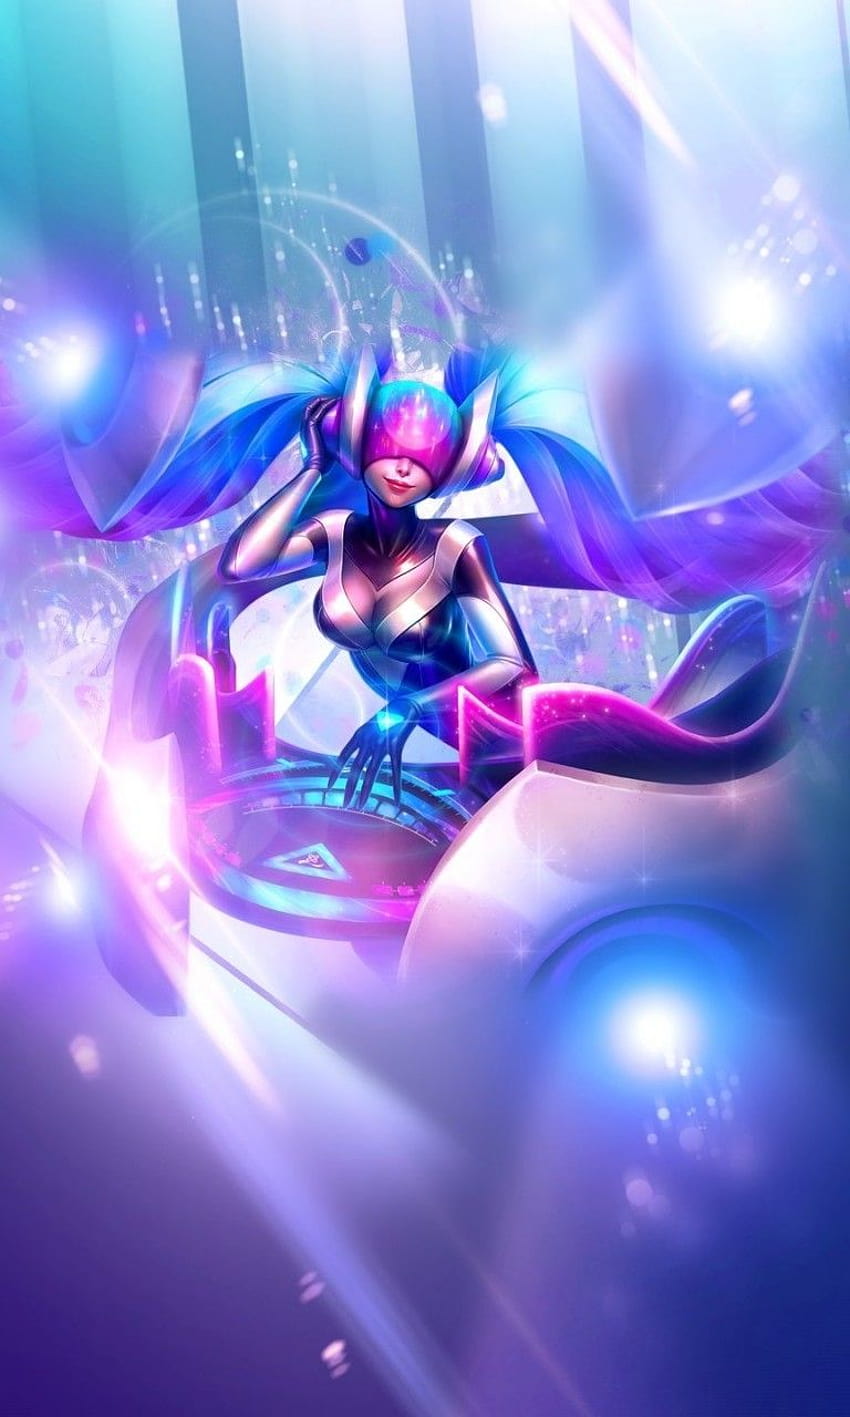 768x1280 Dj Sona, League Of Legends, Electro Music for Galaxy SIV,Nokia Lumia 900,925,1020, Acer Picasso HD phone wallpaper